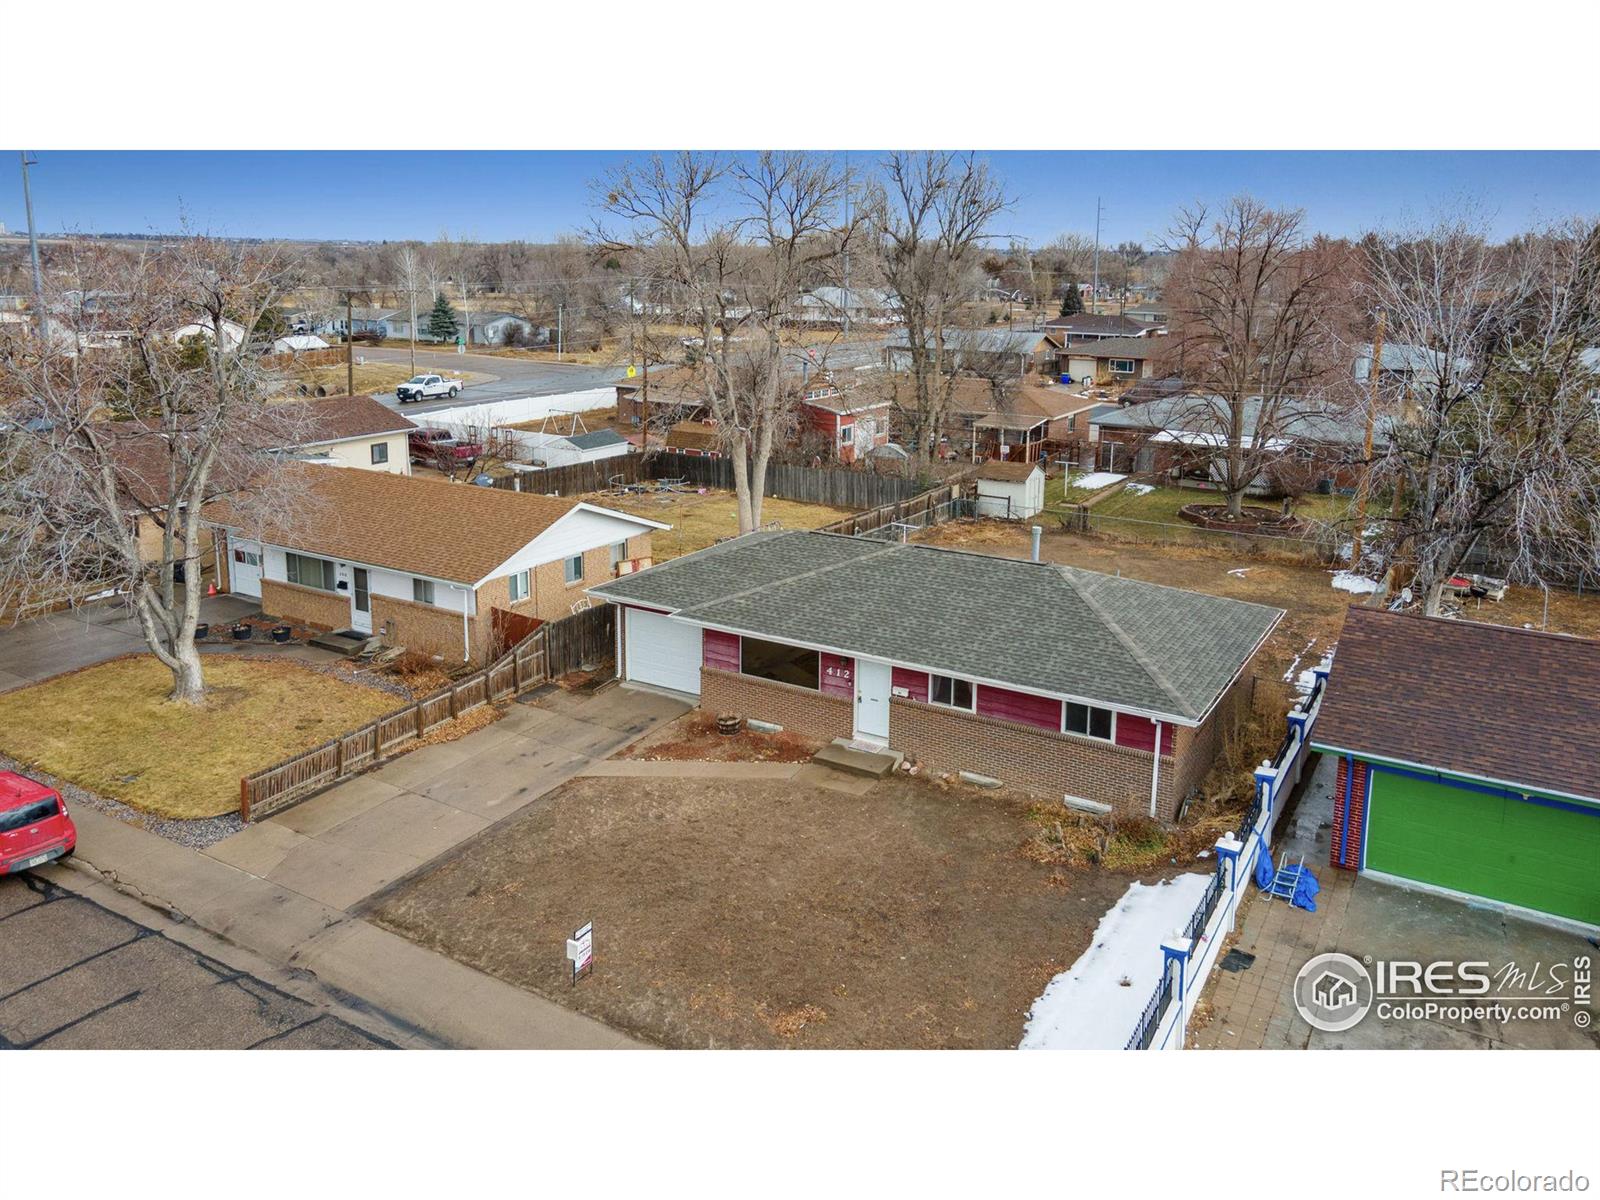 412  30th Ave Ct, greeley MLS: 4567891003802 Beds: 5 Baths: 2 Price: $385,000